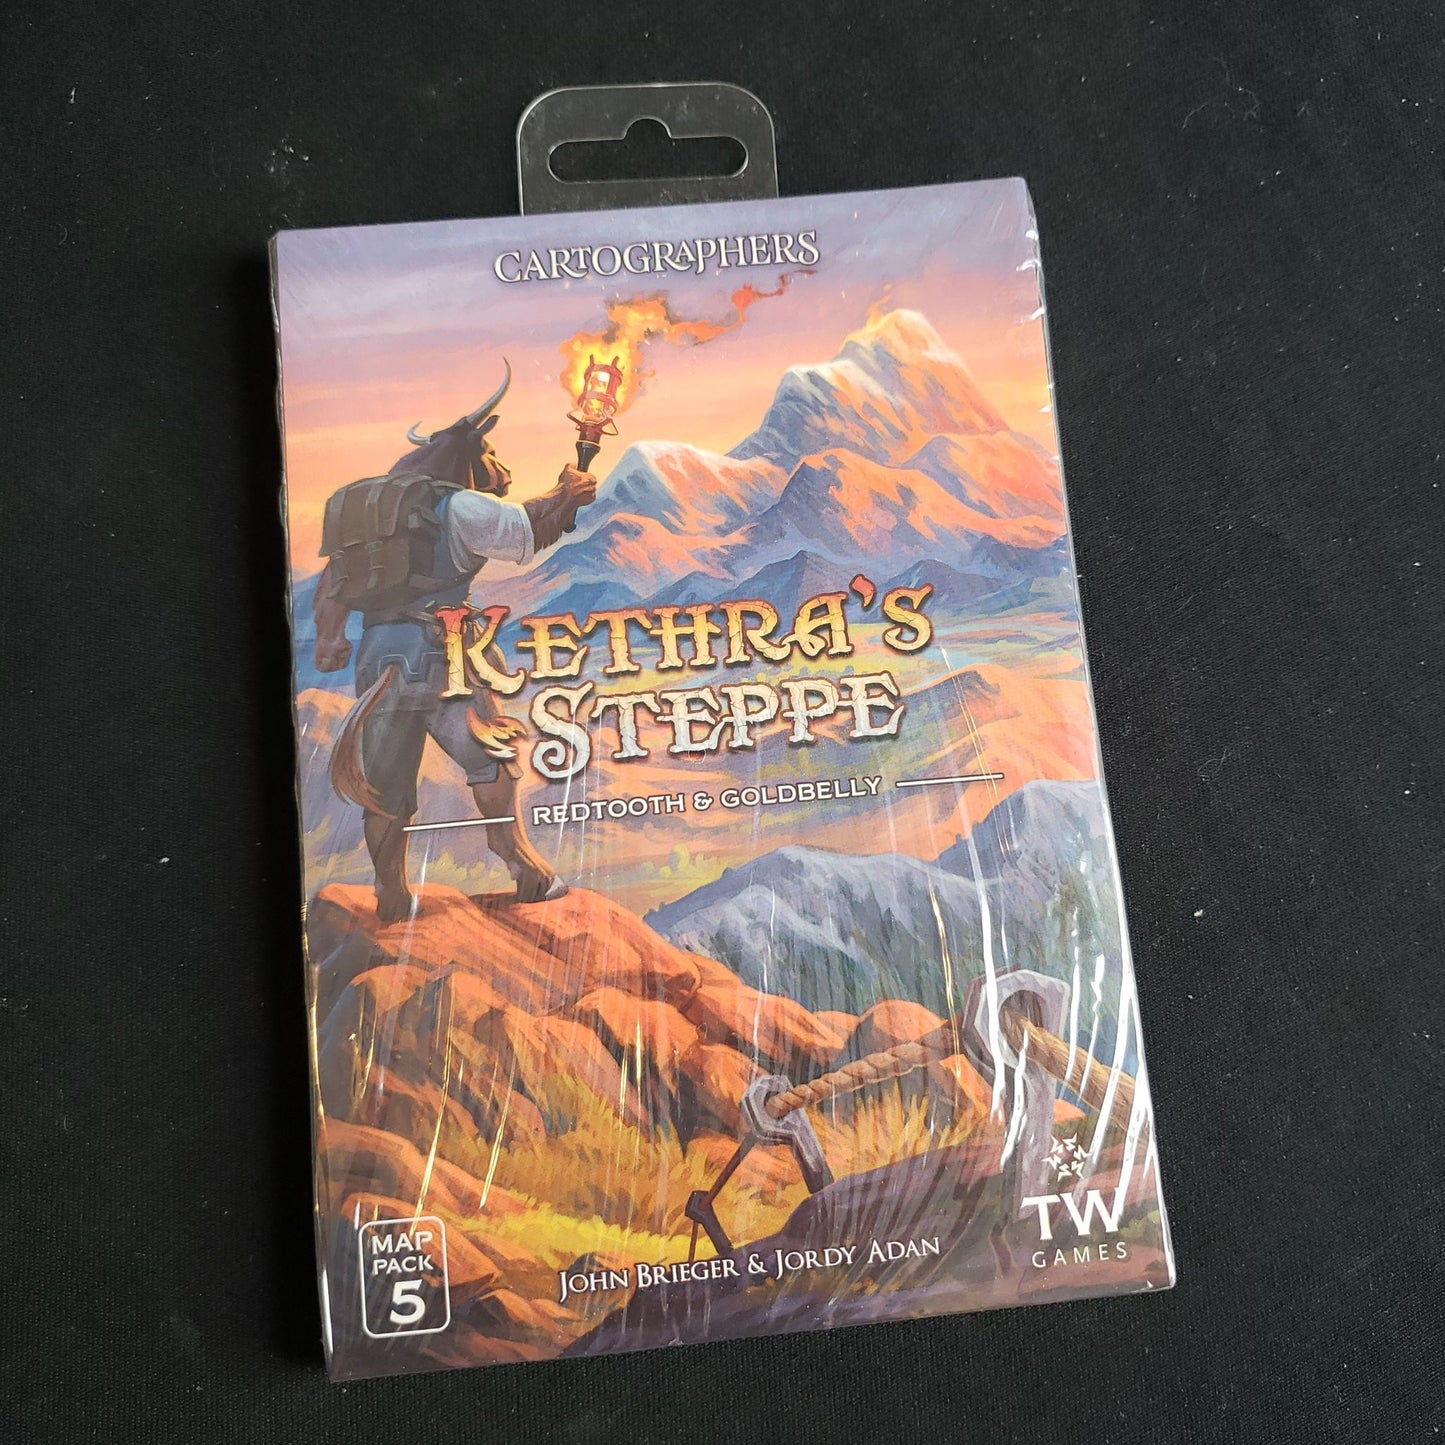 Image shows the front of the package for the Kethra's Steppe expansion for the Cartographers game